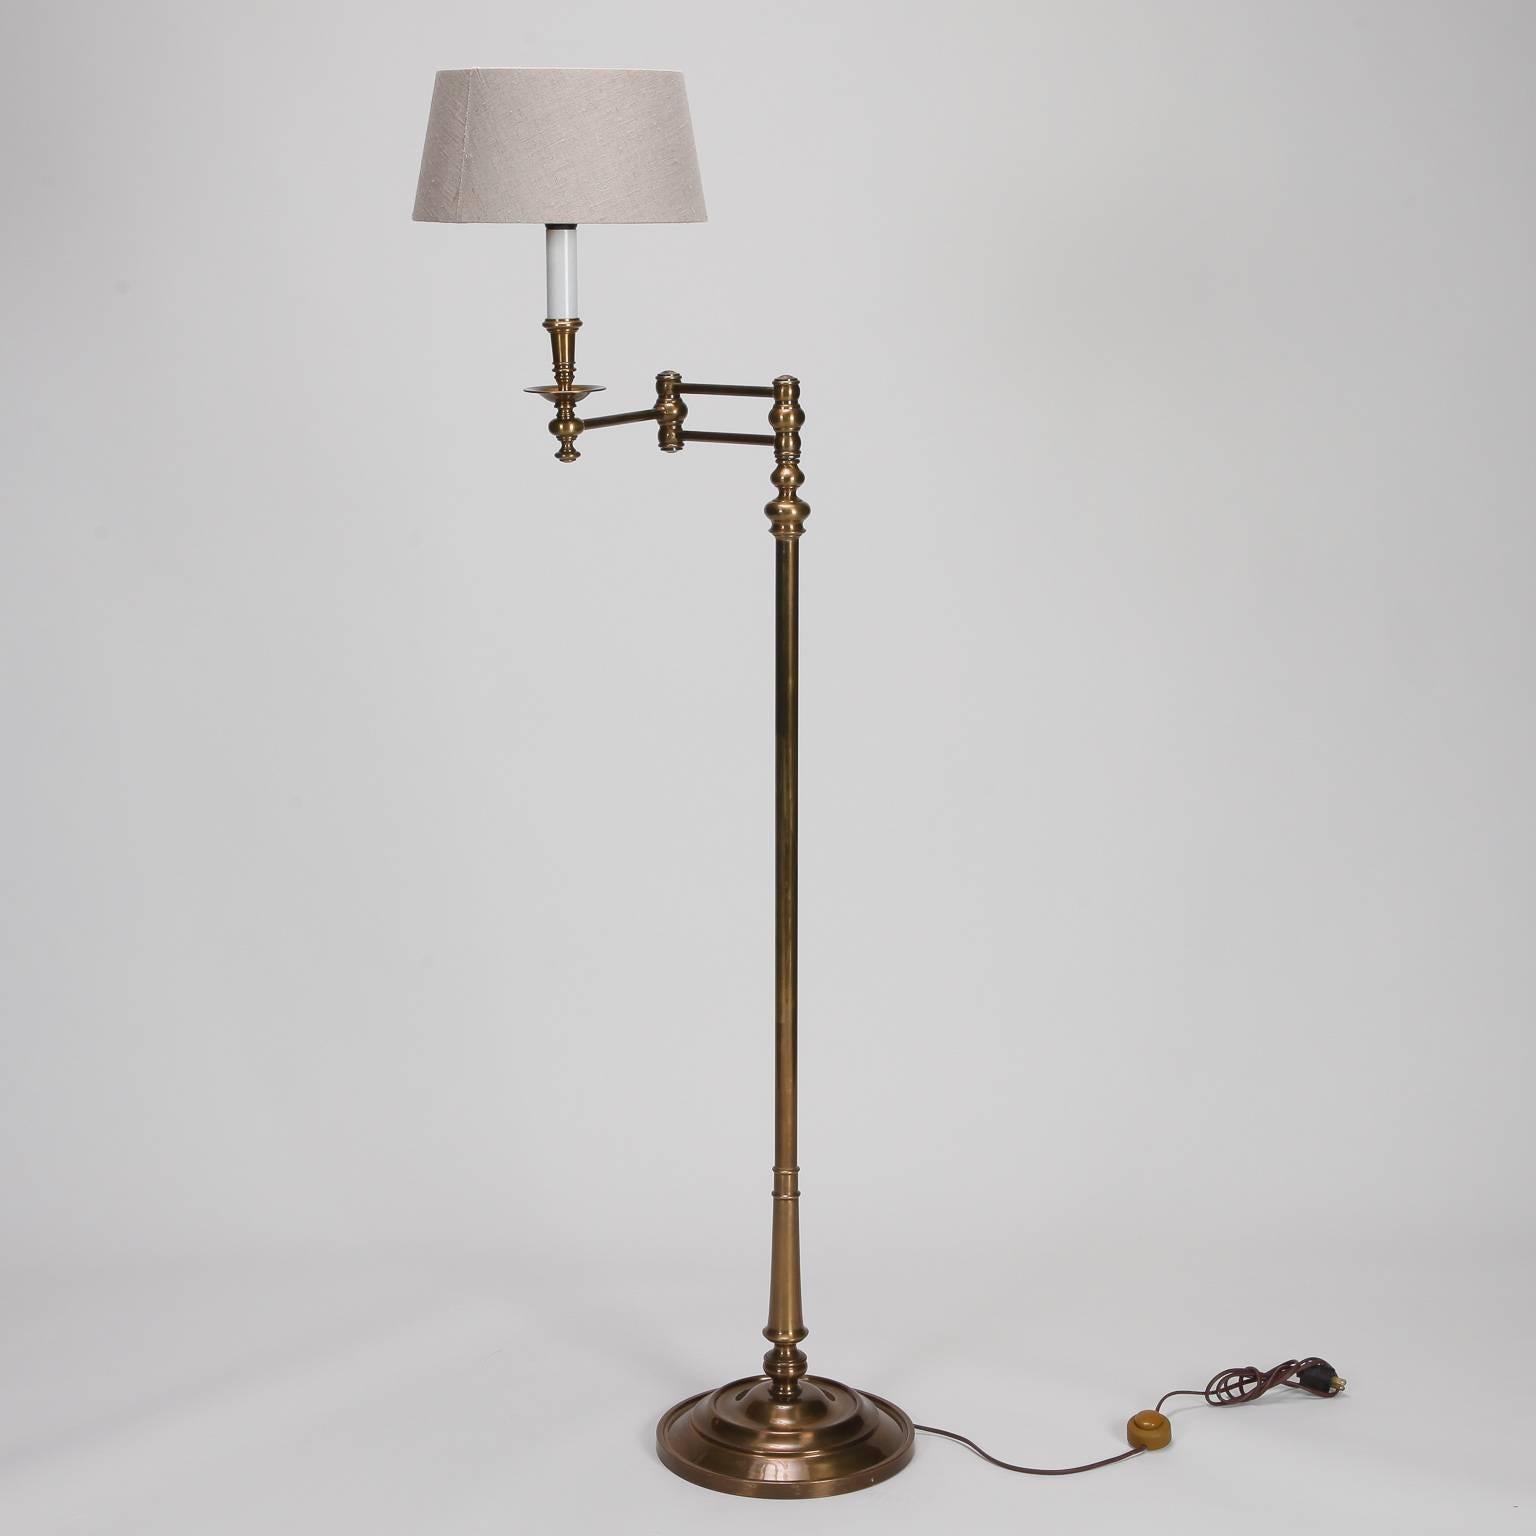 English floor lamp is made of brass, circa 1930s. Swiveling arm makes this perfect for use as a library or reading lamp. Shade shown is included. New wiring for US electrical standards.